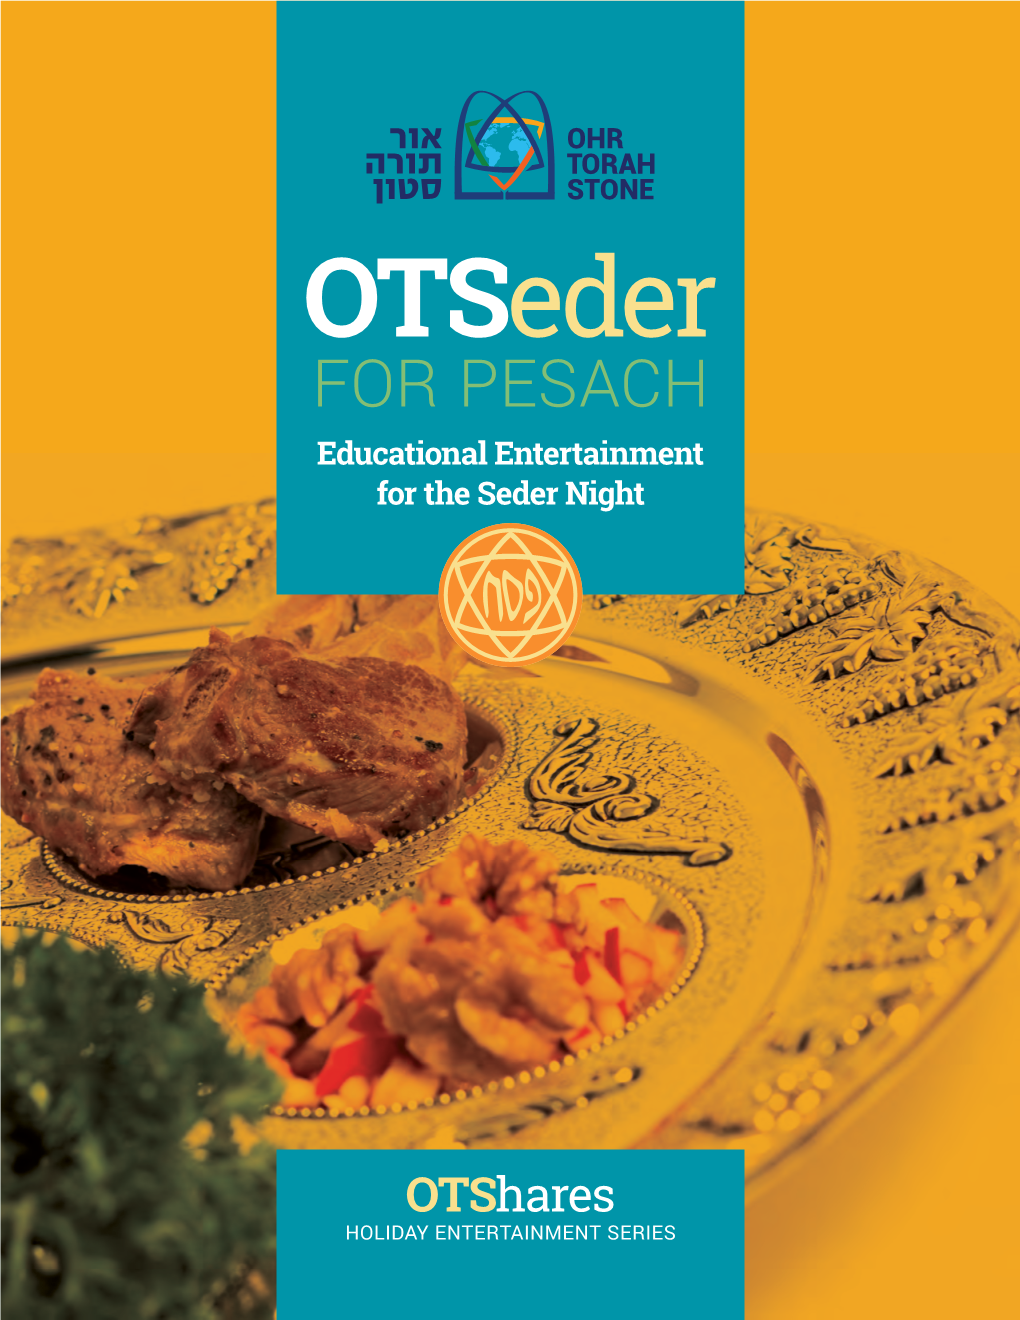 Otseder for PESACH Educational Entertainment for the Seder Night